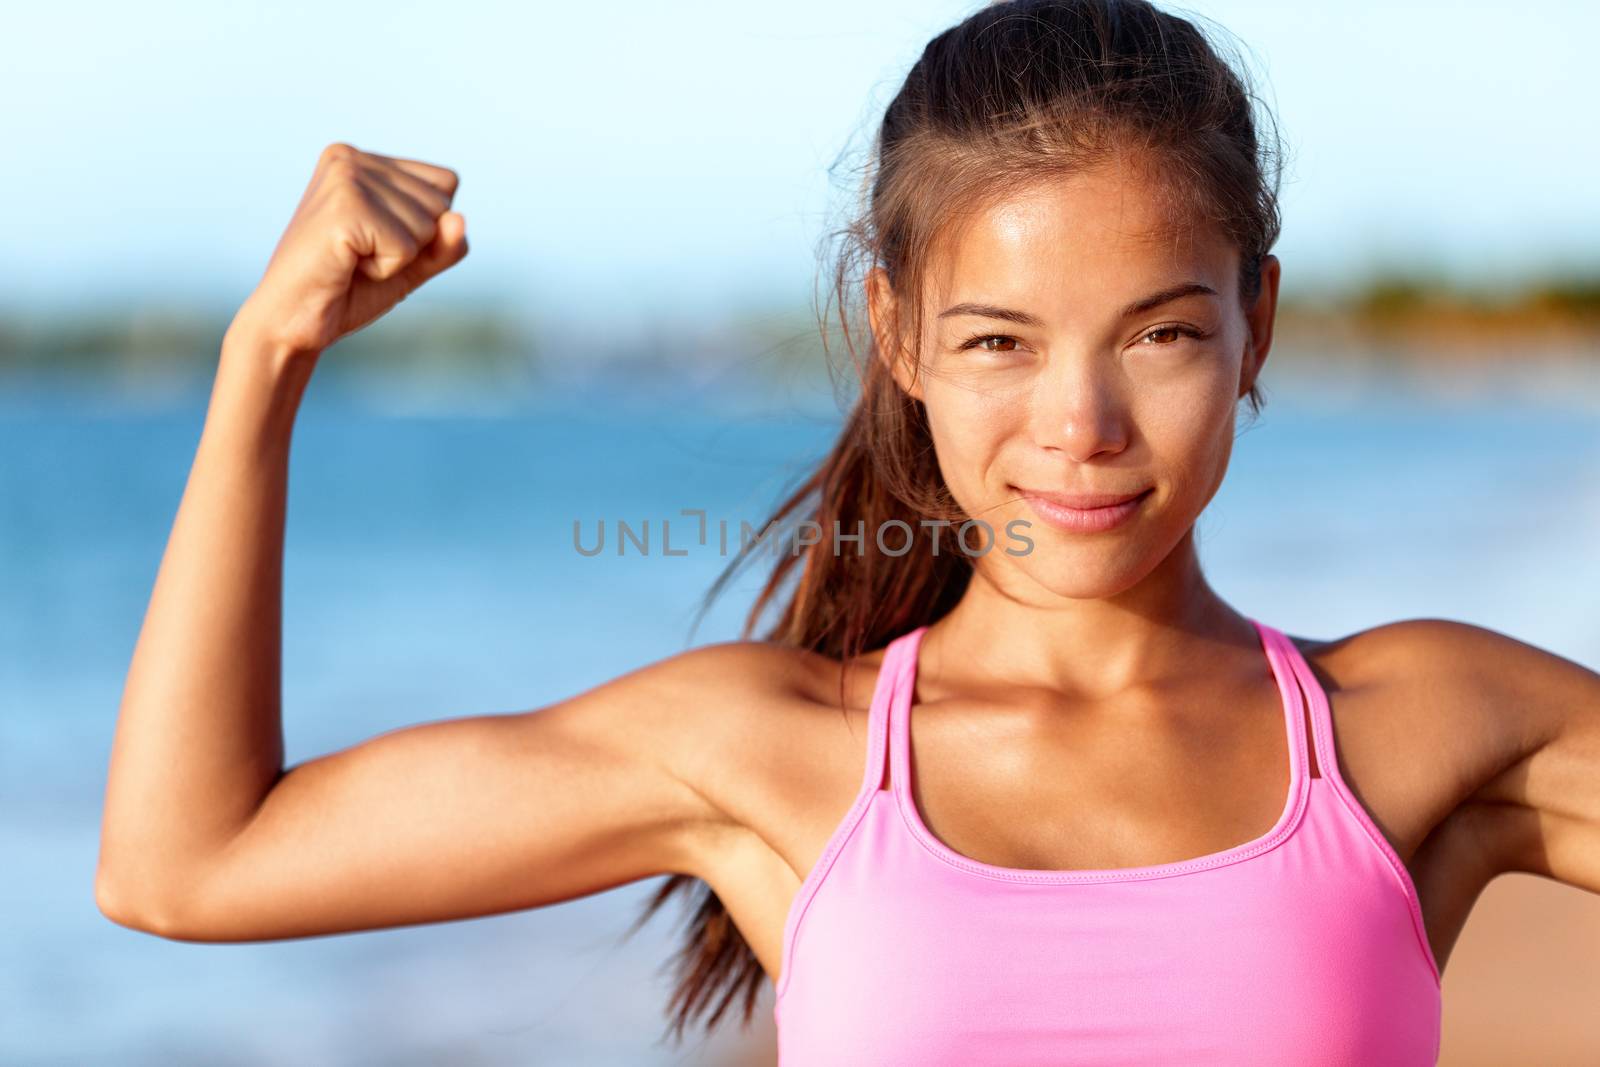 Confident sporty woman flexing muscles on beach. Beautiful young is wearing pink sports bra. Female is showing her strength and healthy lifestyle on sunny day.